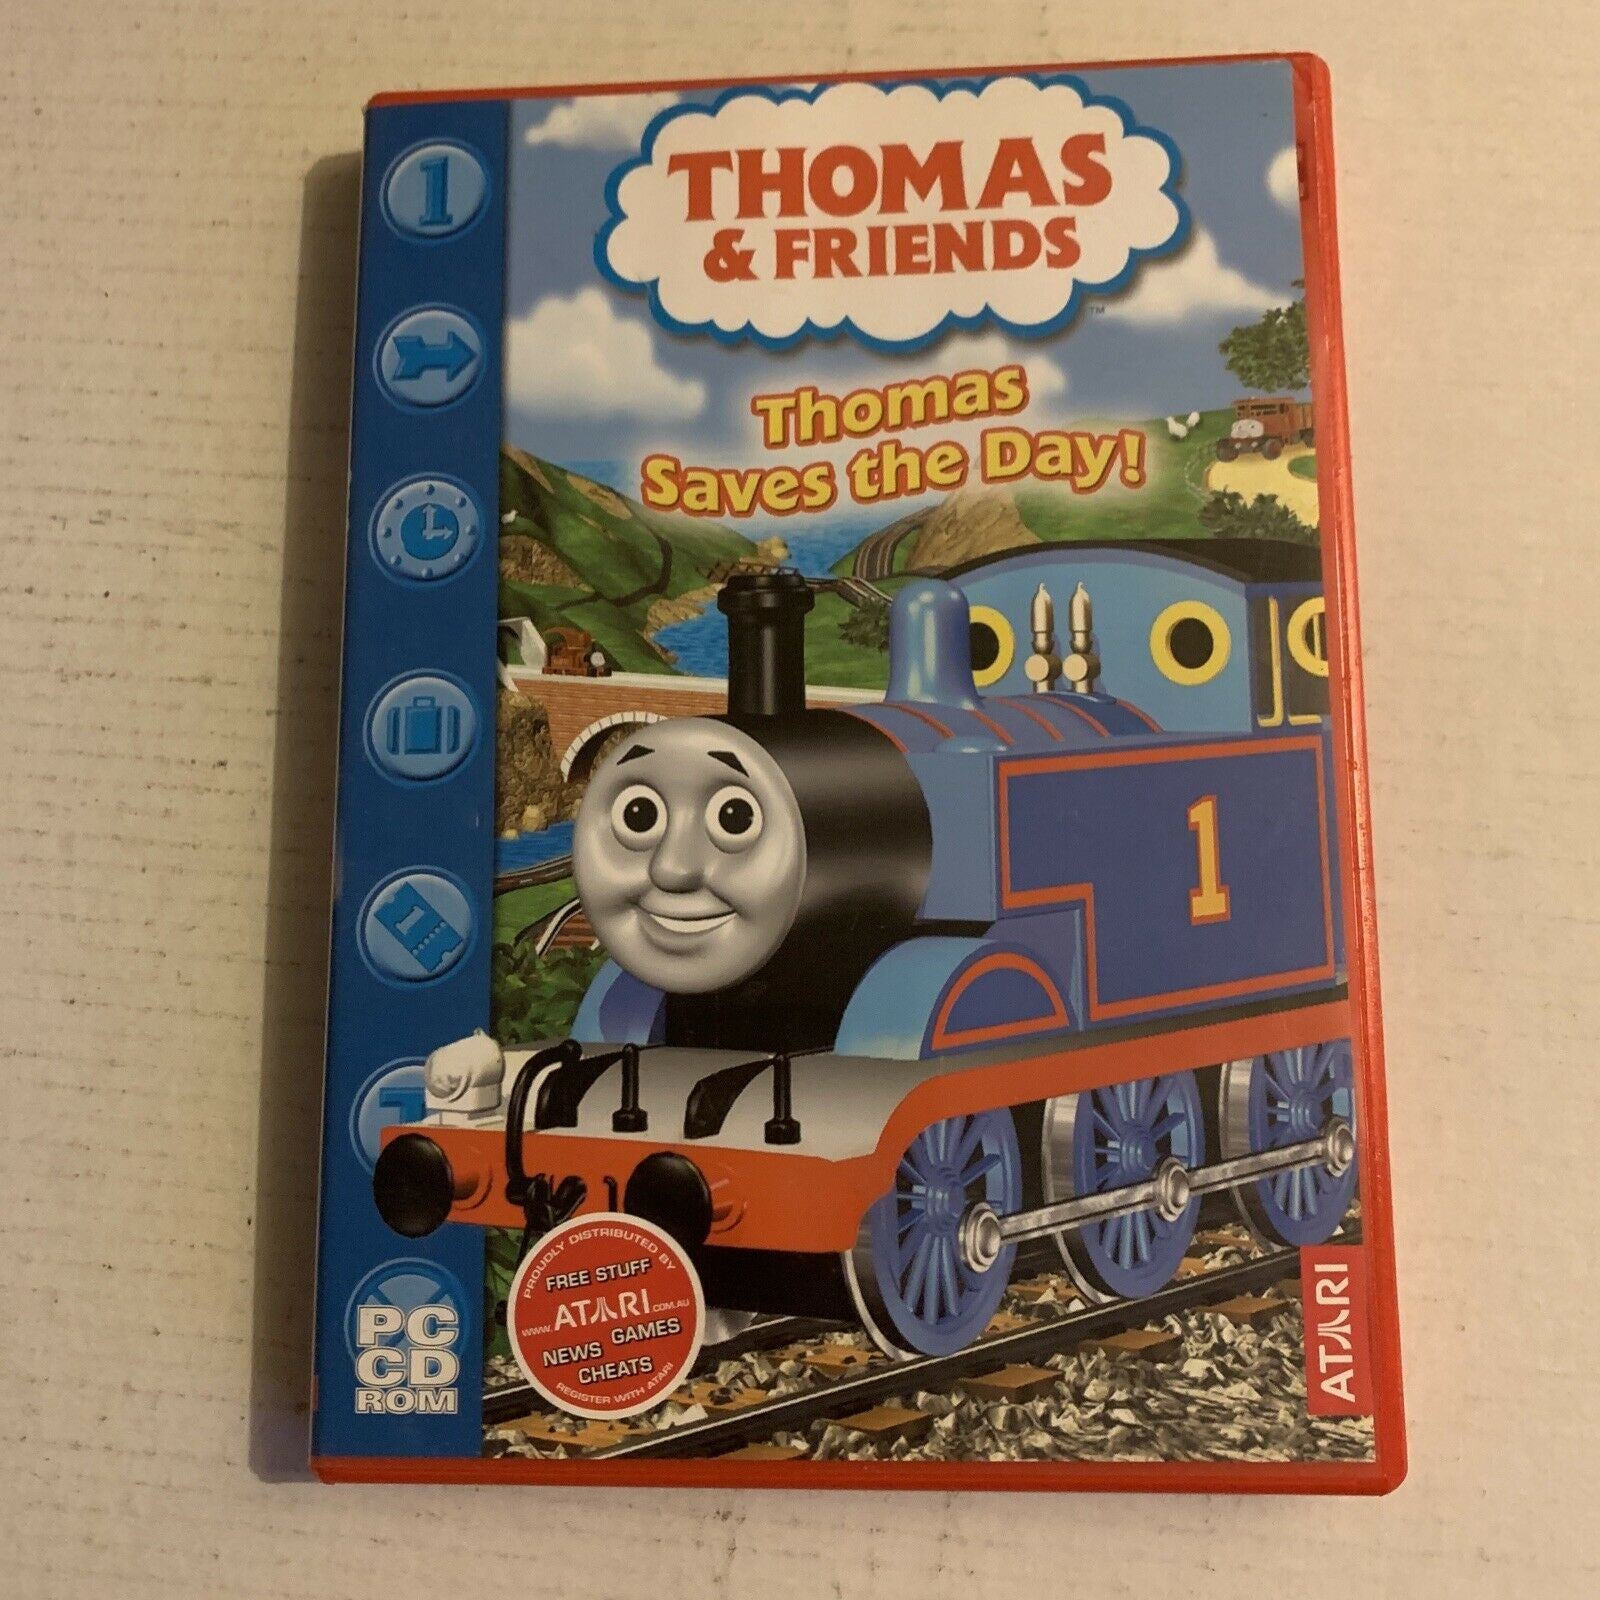 Thomas & Friends - Thomas Saves The Day! PC CDROM Video Game 2003 Win9 ...